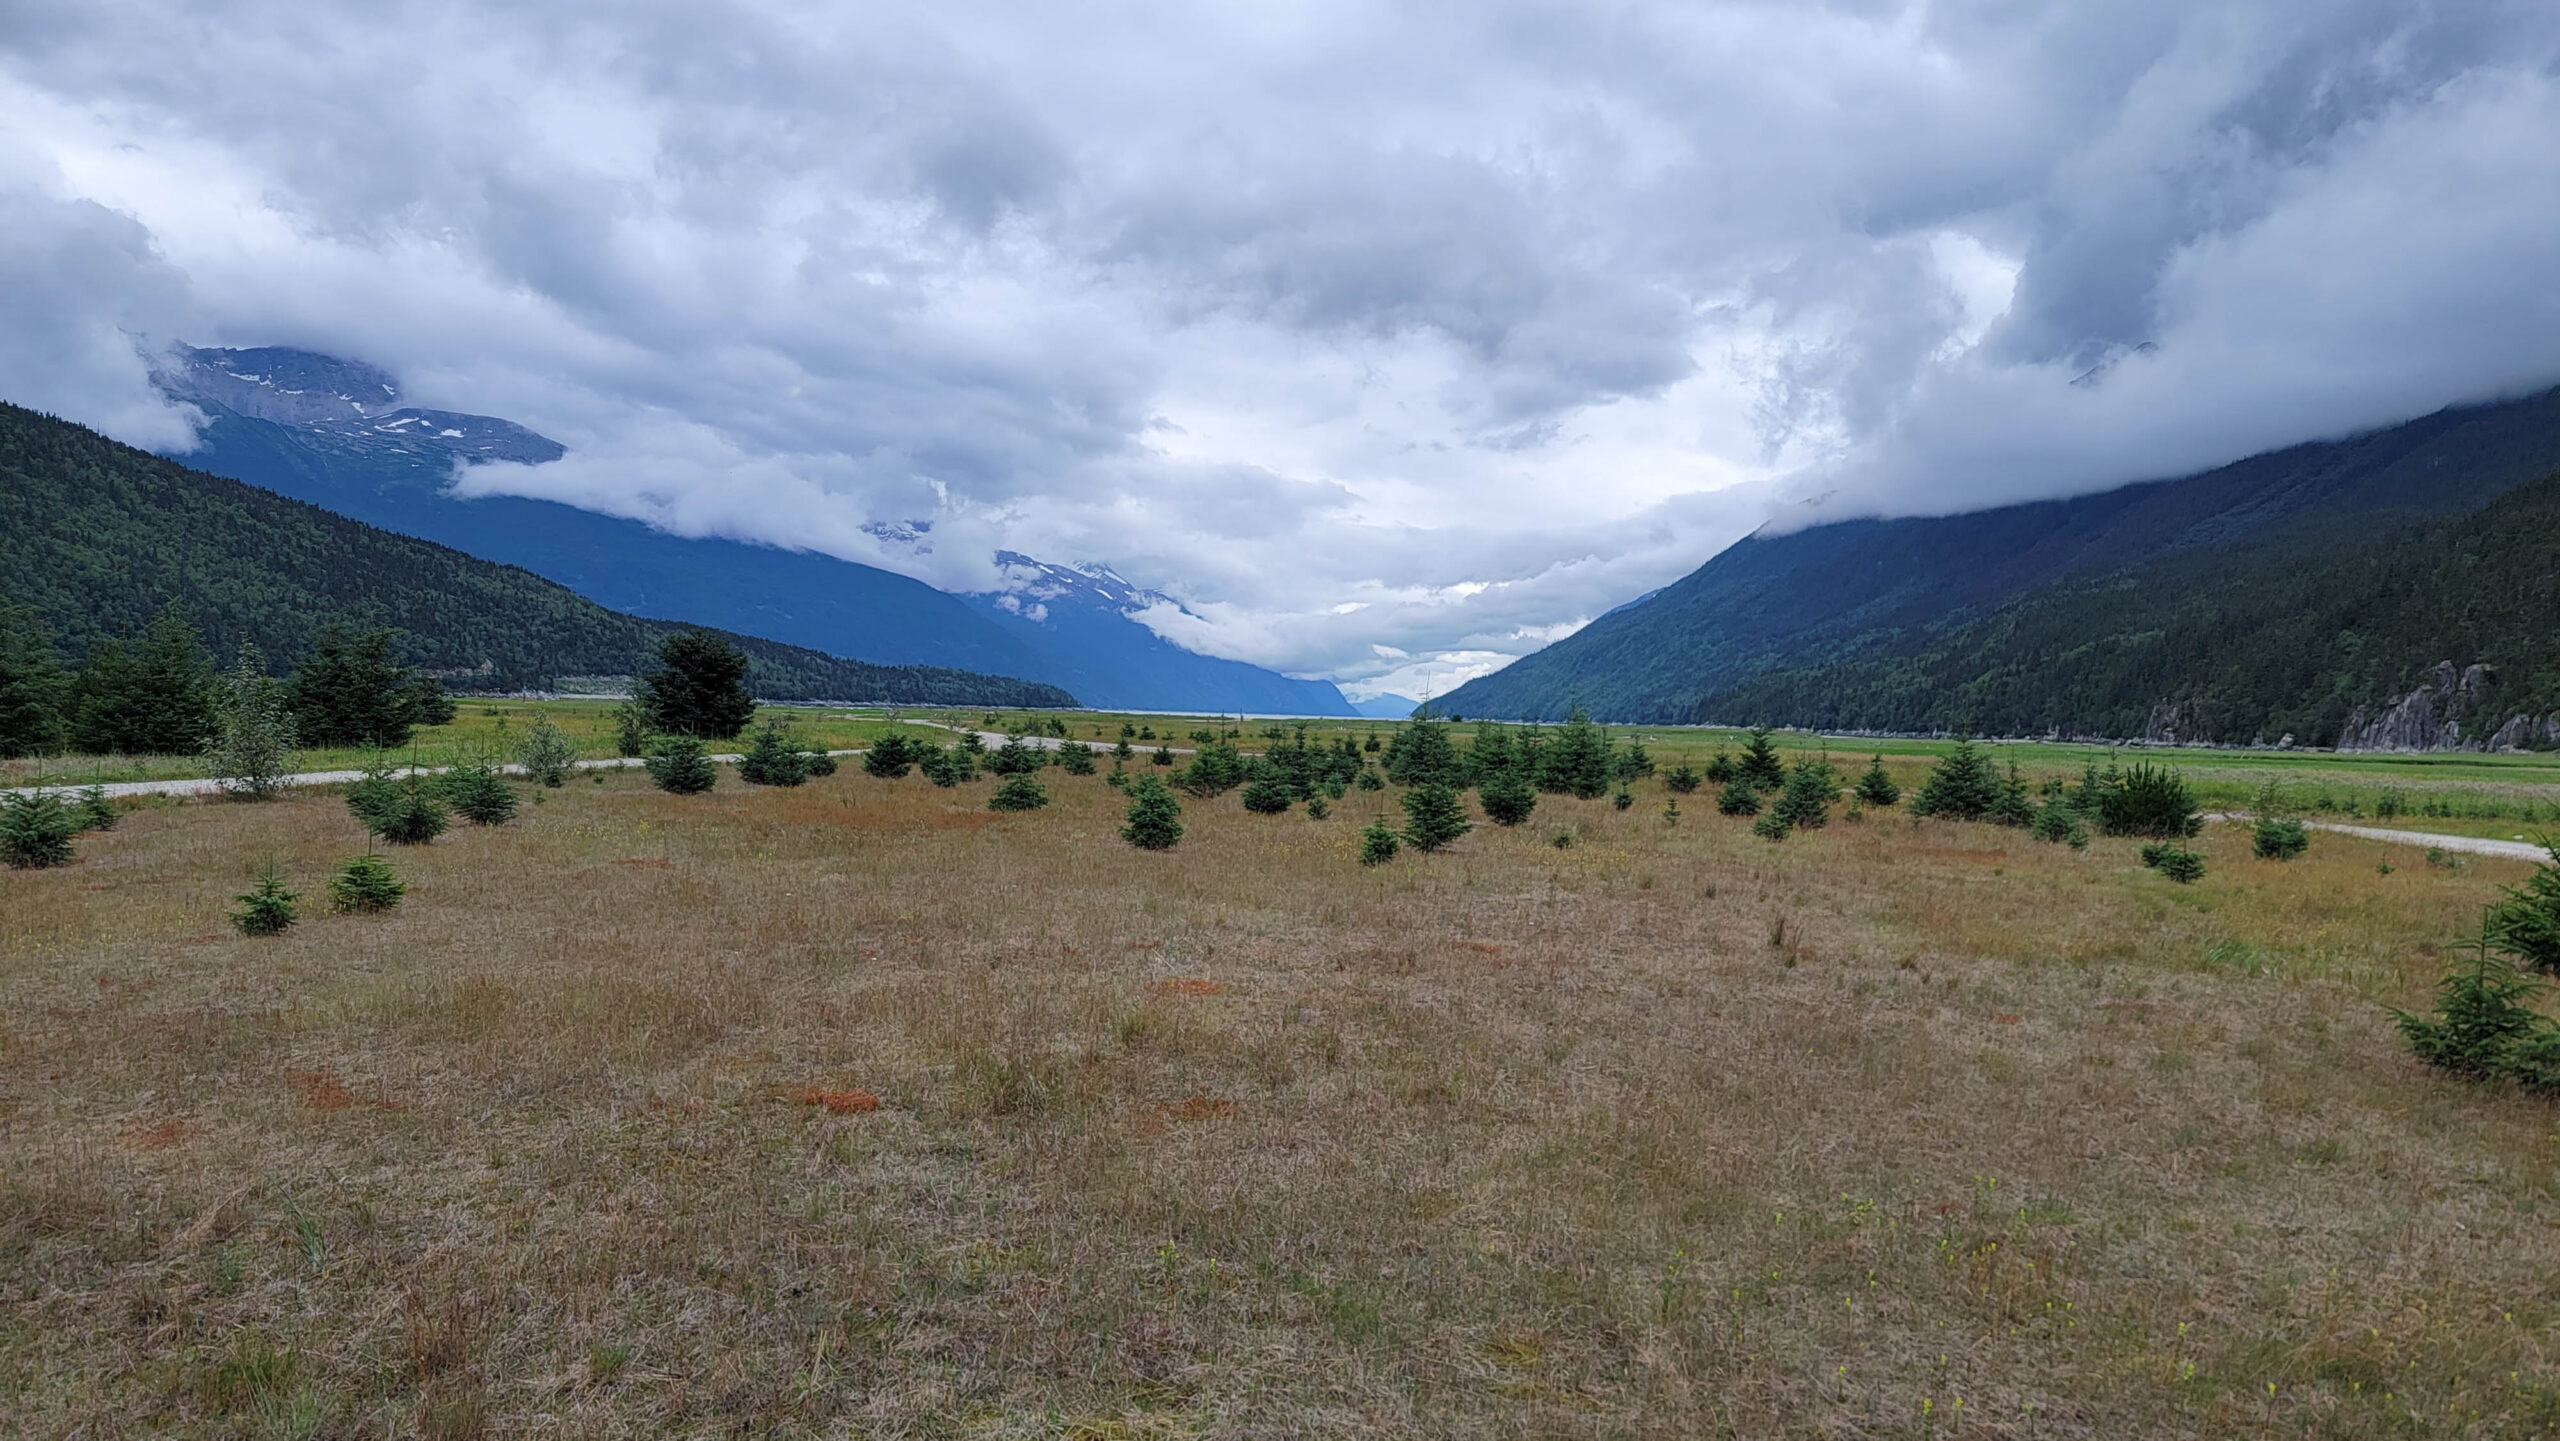 The view from my horse Extra in Skagway, Alasksa